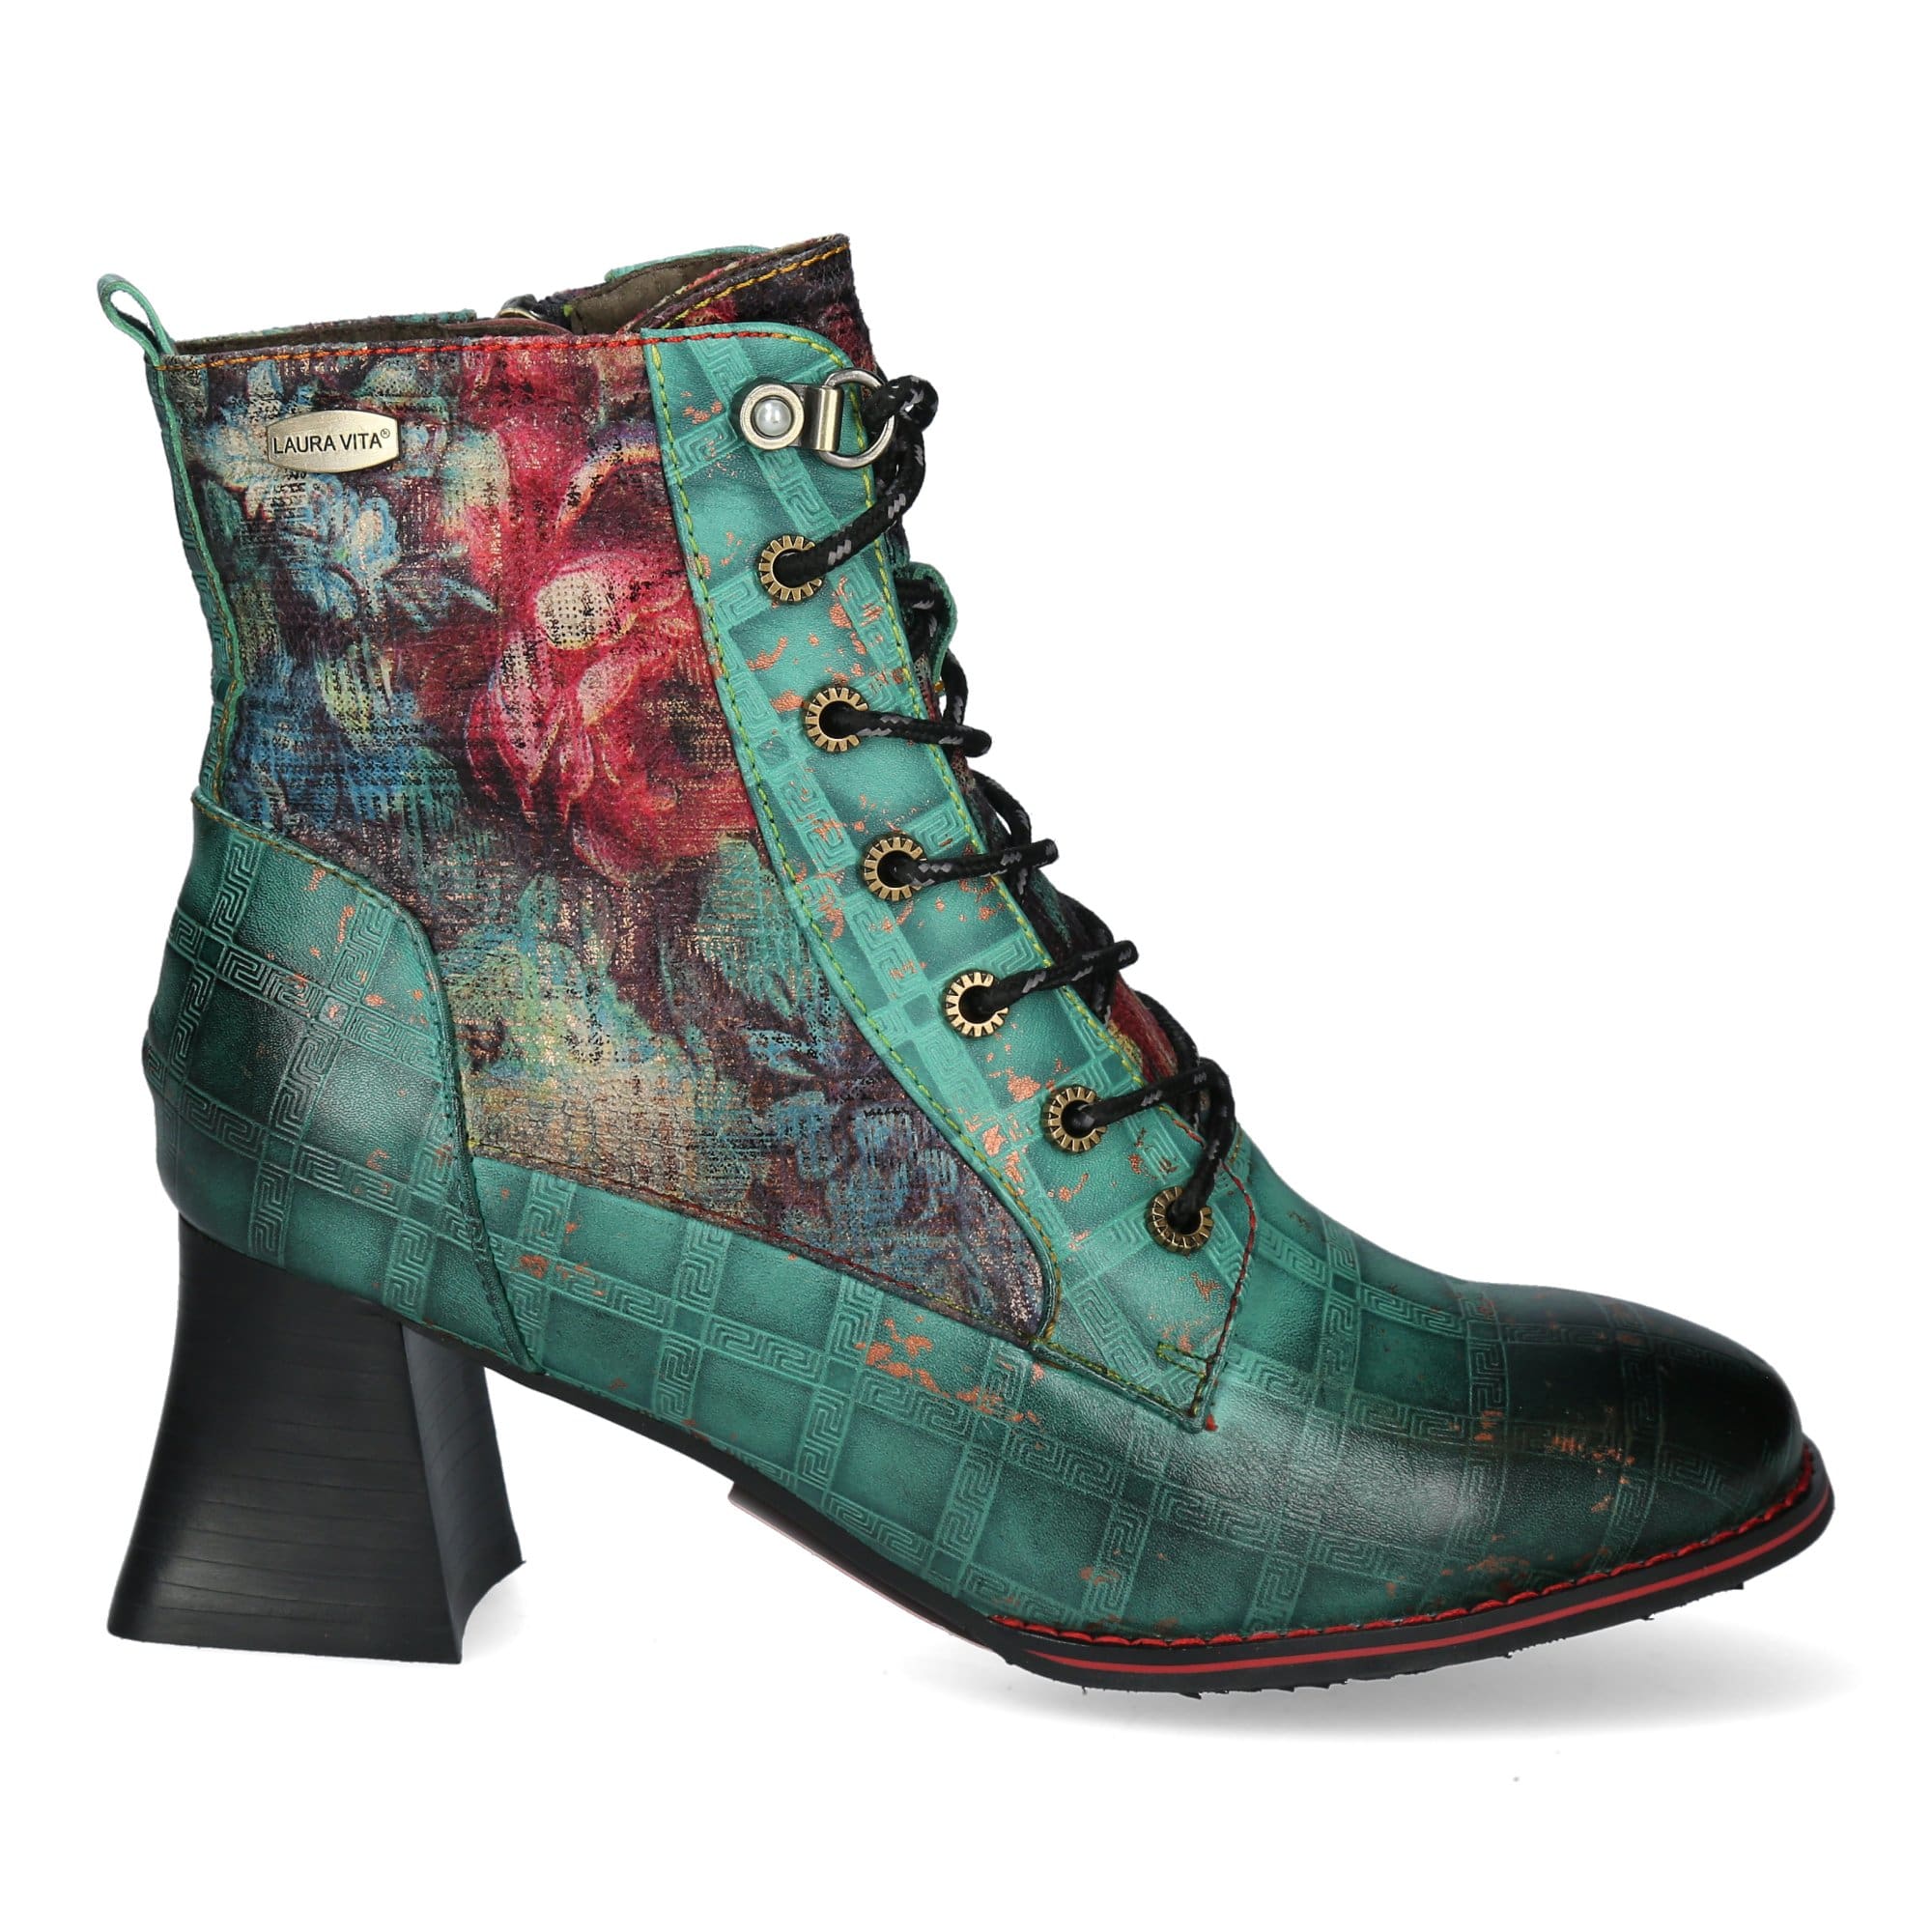 Chaussure KORAO 03 - 35 / Turquoise - Boots